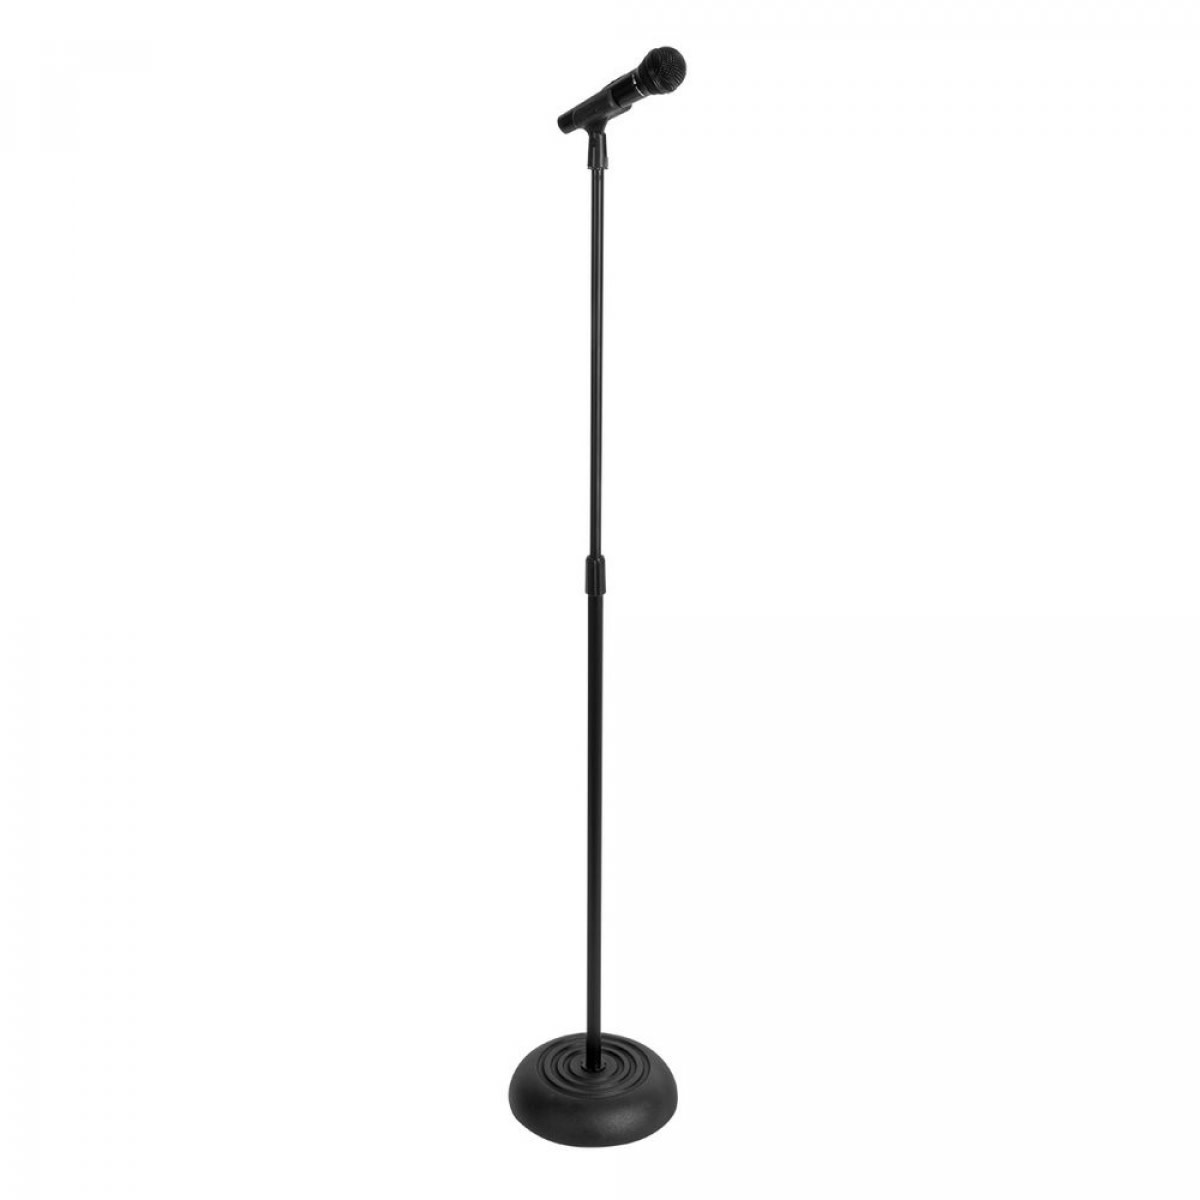 On Stage - Round Base Microphone Music Shop